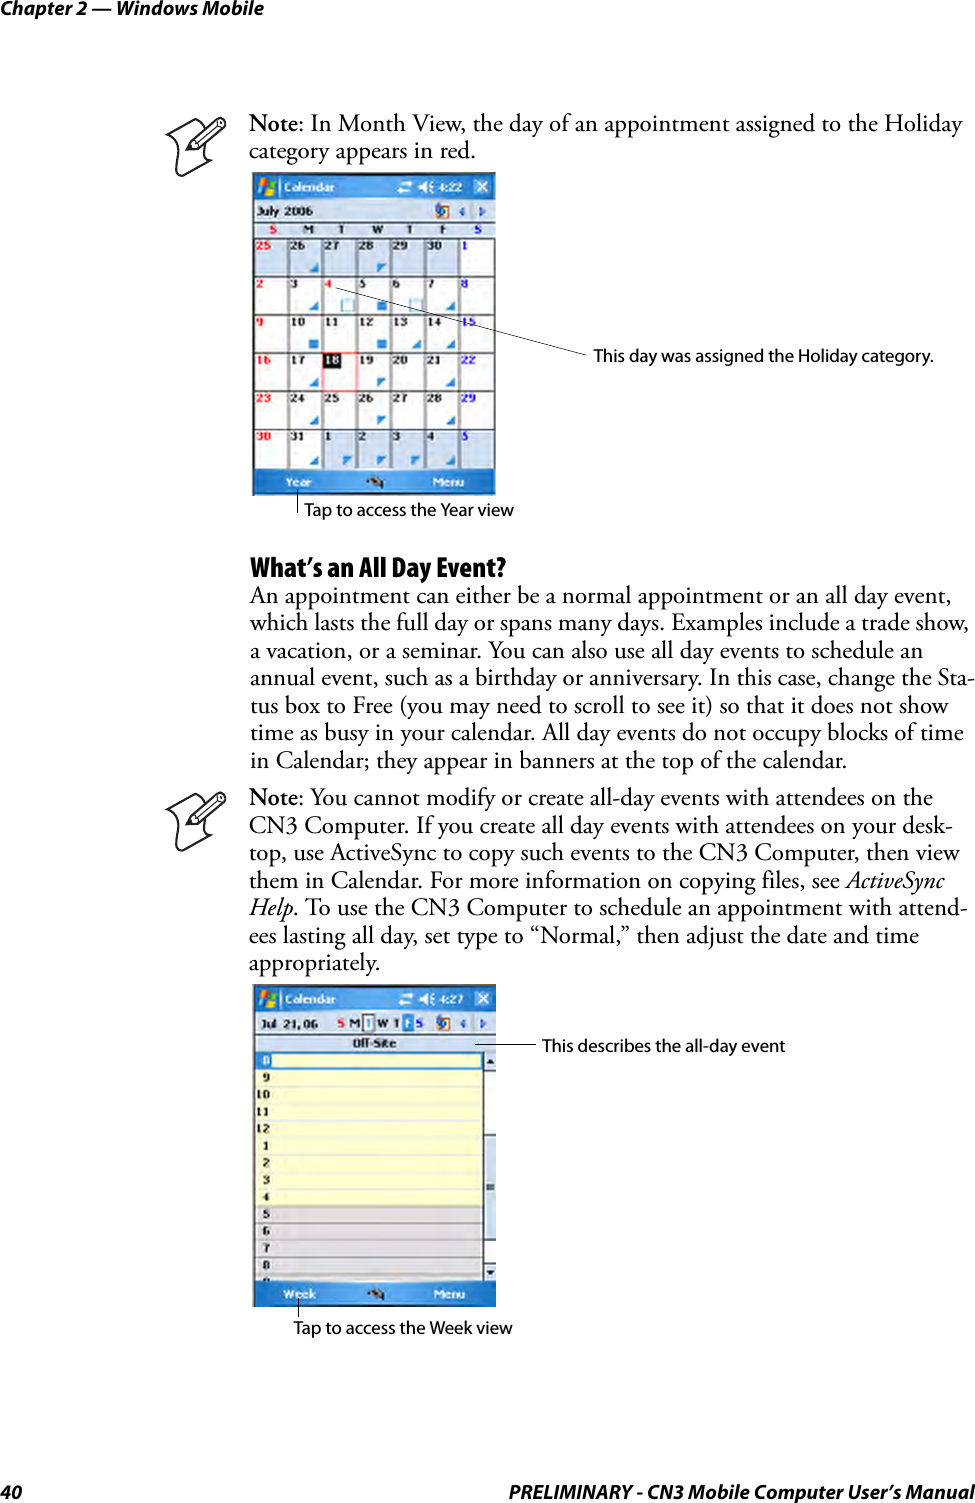 Chapter 2 — Windows Mobile40 PRELIMINARY - CN3 Mobile Computer User’s ManualWhat’s an All Day Event?An appointment can either be a normal appointment or an all day event, which lasts the full day or spans many days. Examples include a trade show, a vacation, or a seminar. You can also use all day events to schedule an annual event, such as a birthday or anniversary. In this case, change the Sta-tus box to Free (you may need to scroll to see it) so that it does not show time as busy in your calendar. All day events do not occupy blocks of time in Calendar; they appear in banners at the top of the calendar.Note: In Month View, the day of an appointment assigned to the Holiday category appears in red.Note: You cannot modify or create all-day events with attendees on the CN3 Computer. If you create all day events with attendees on your desk-top, use ActiveSync to copy such events to the CN3 Computer, then view them in Calendar. For more information on copying files, see ActiveSync Help. To use the CN3 Computer to schedule an appointment with attend-ees lasting all day, set type to “Normal,” then adjust the date and time appropriately.This day was assigned the Holiday category.Tap to access the Year viewThis describes the all-day eventTap to access the Week view